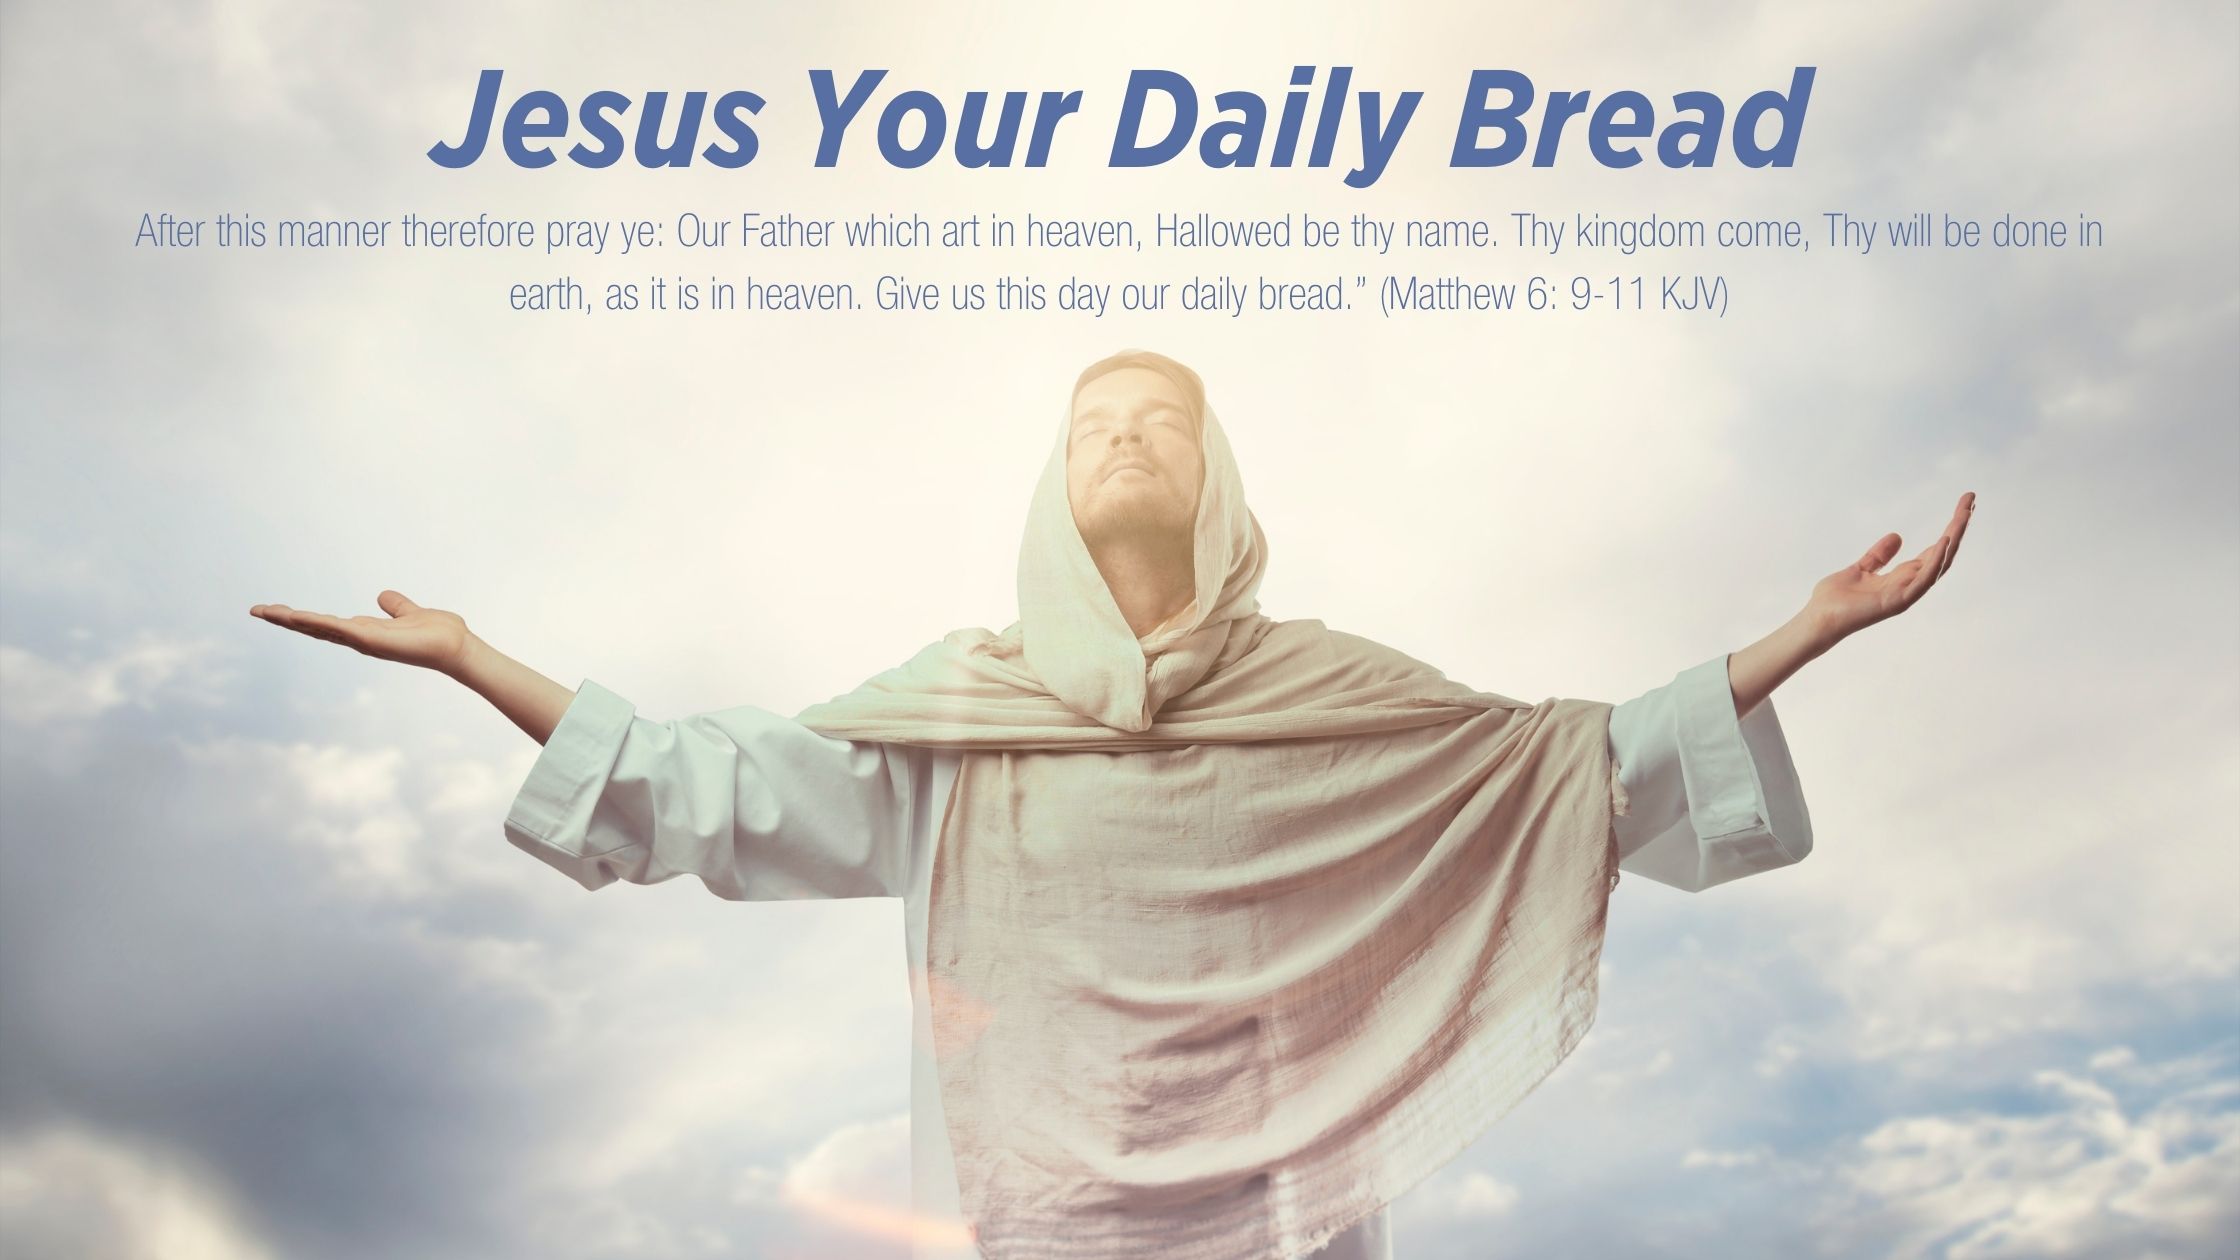 Jesus is our daily bread